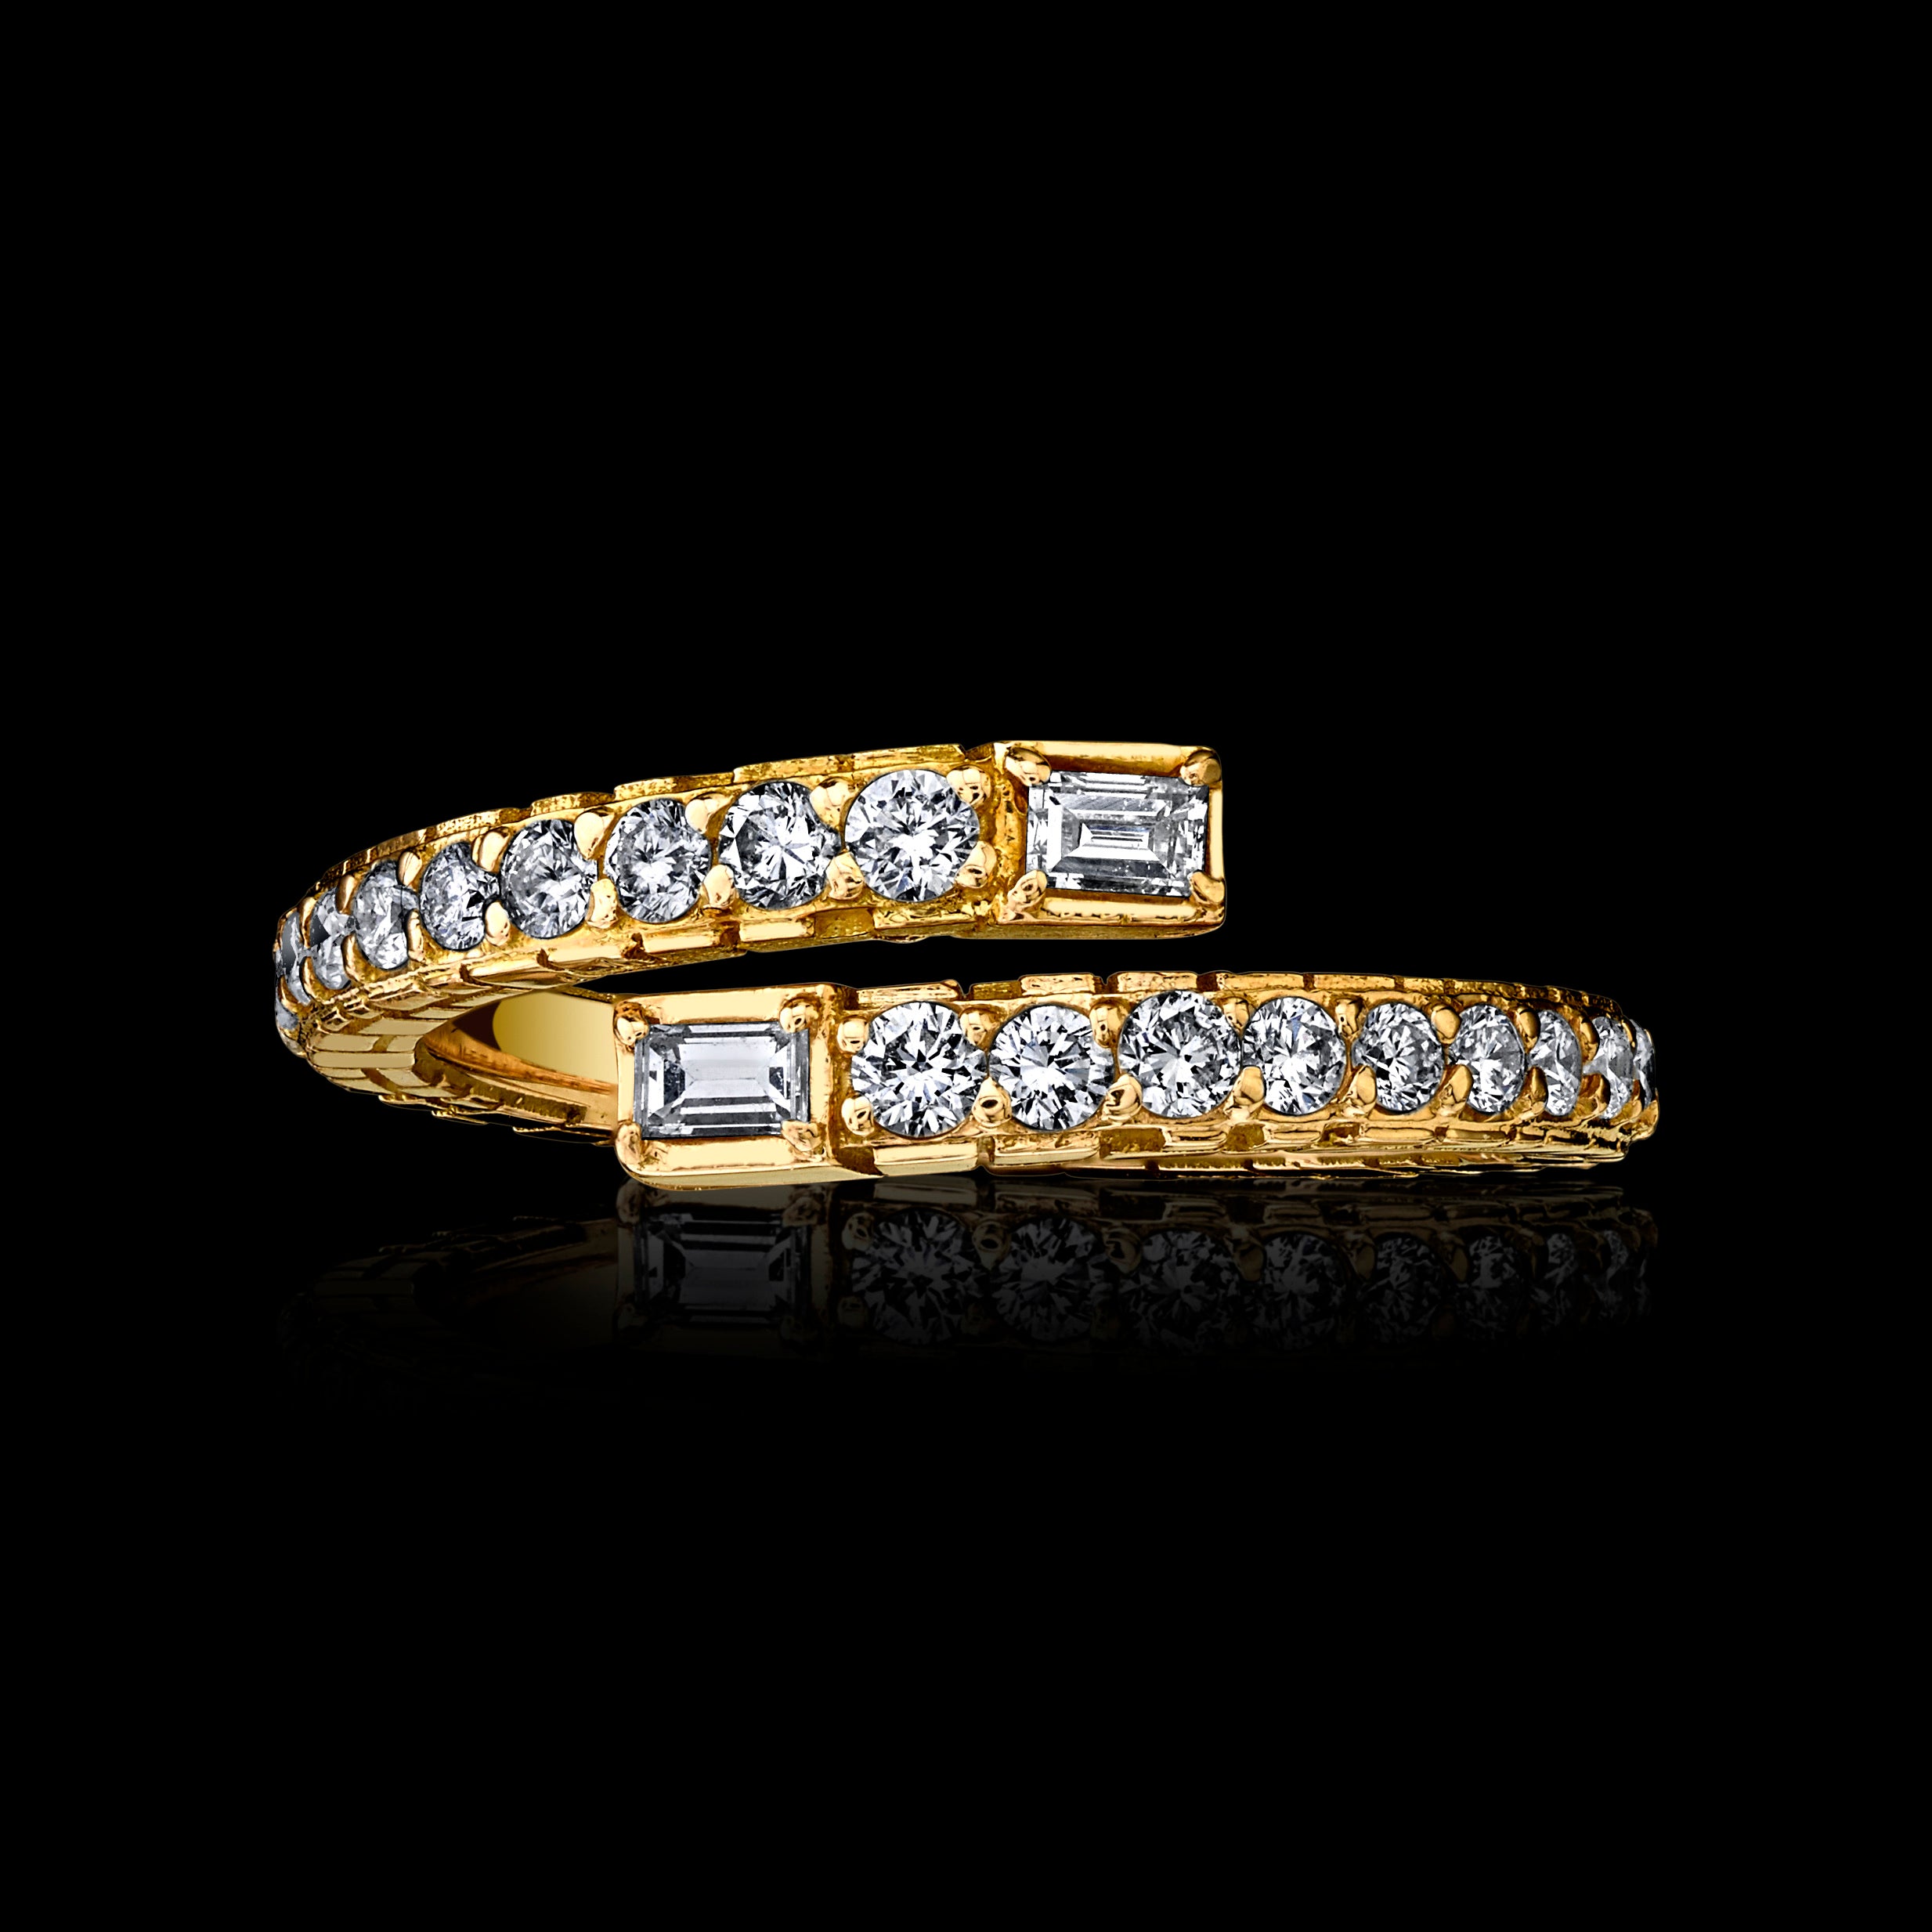 Spiral Collection 18k Gold Half Spiral Ring with 5 point matching Baguette Diamonds